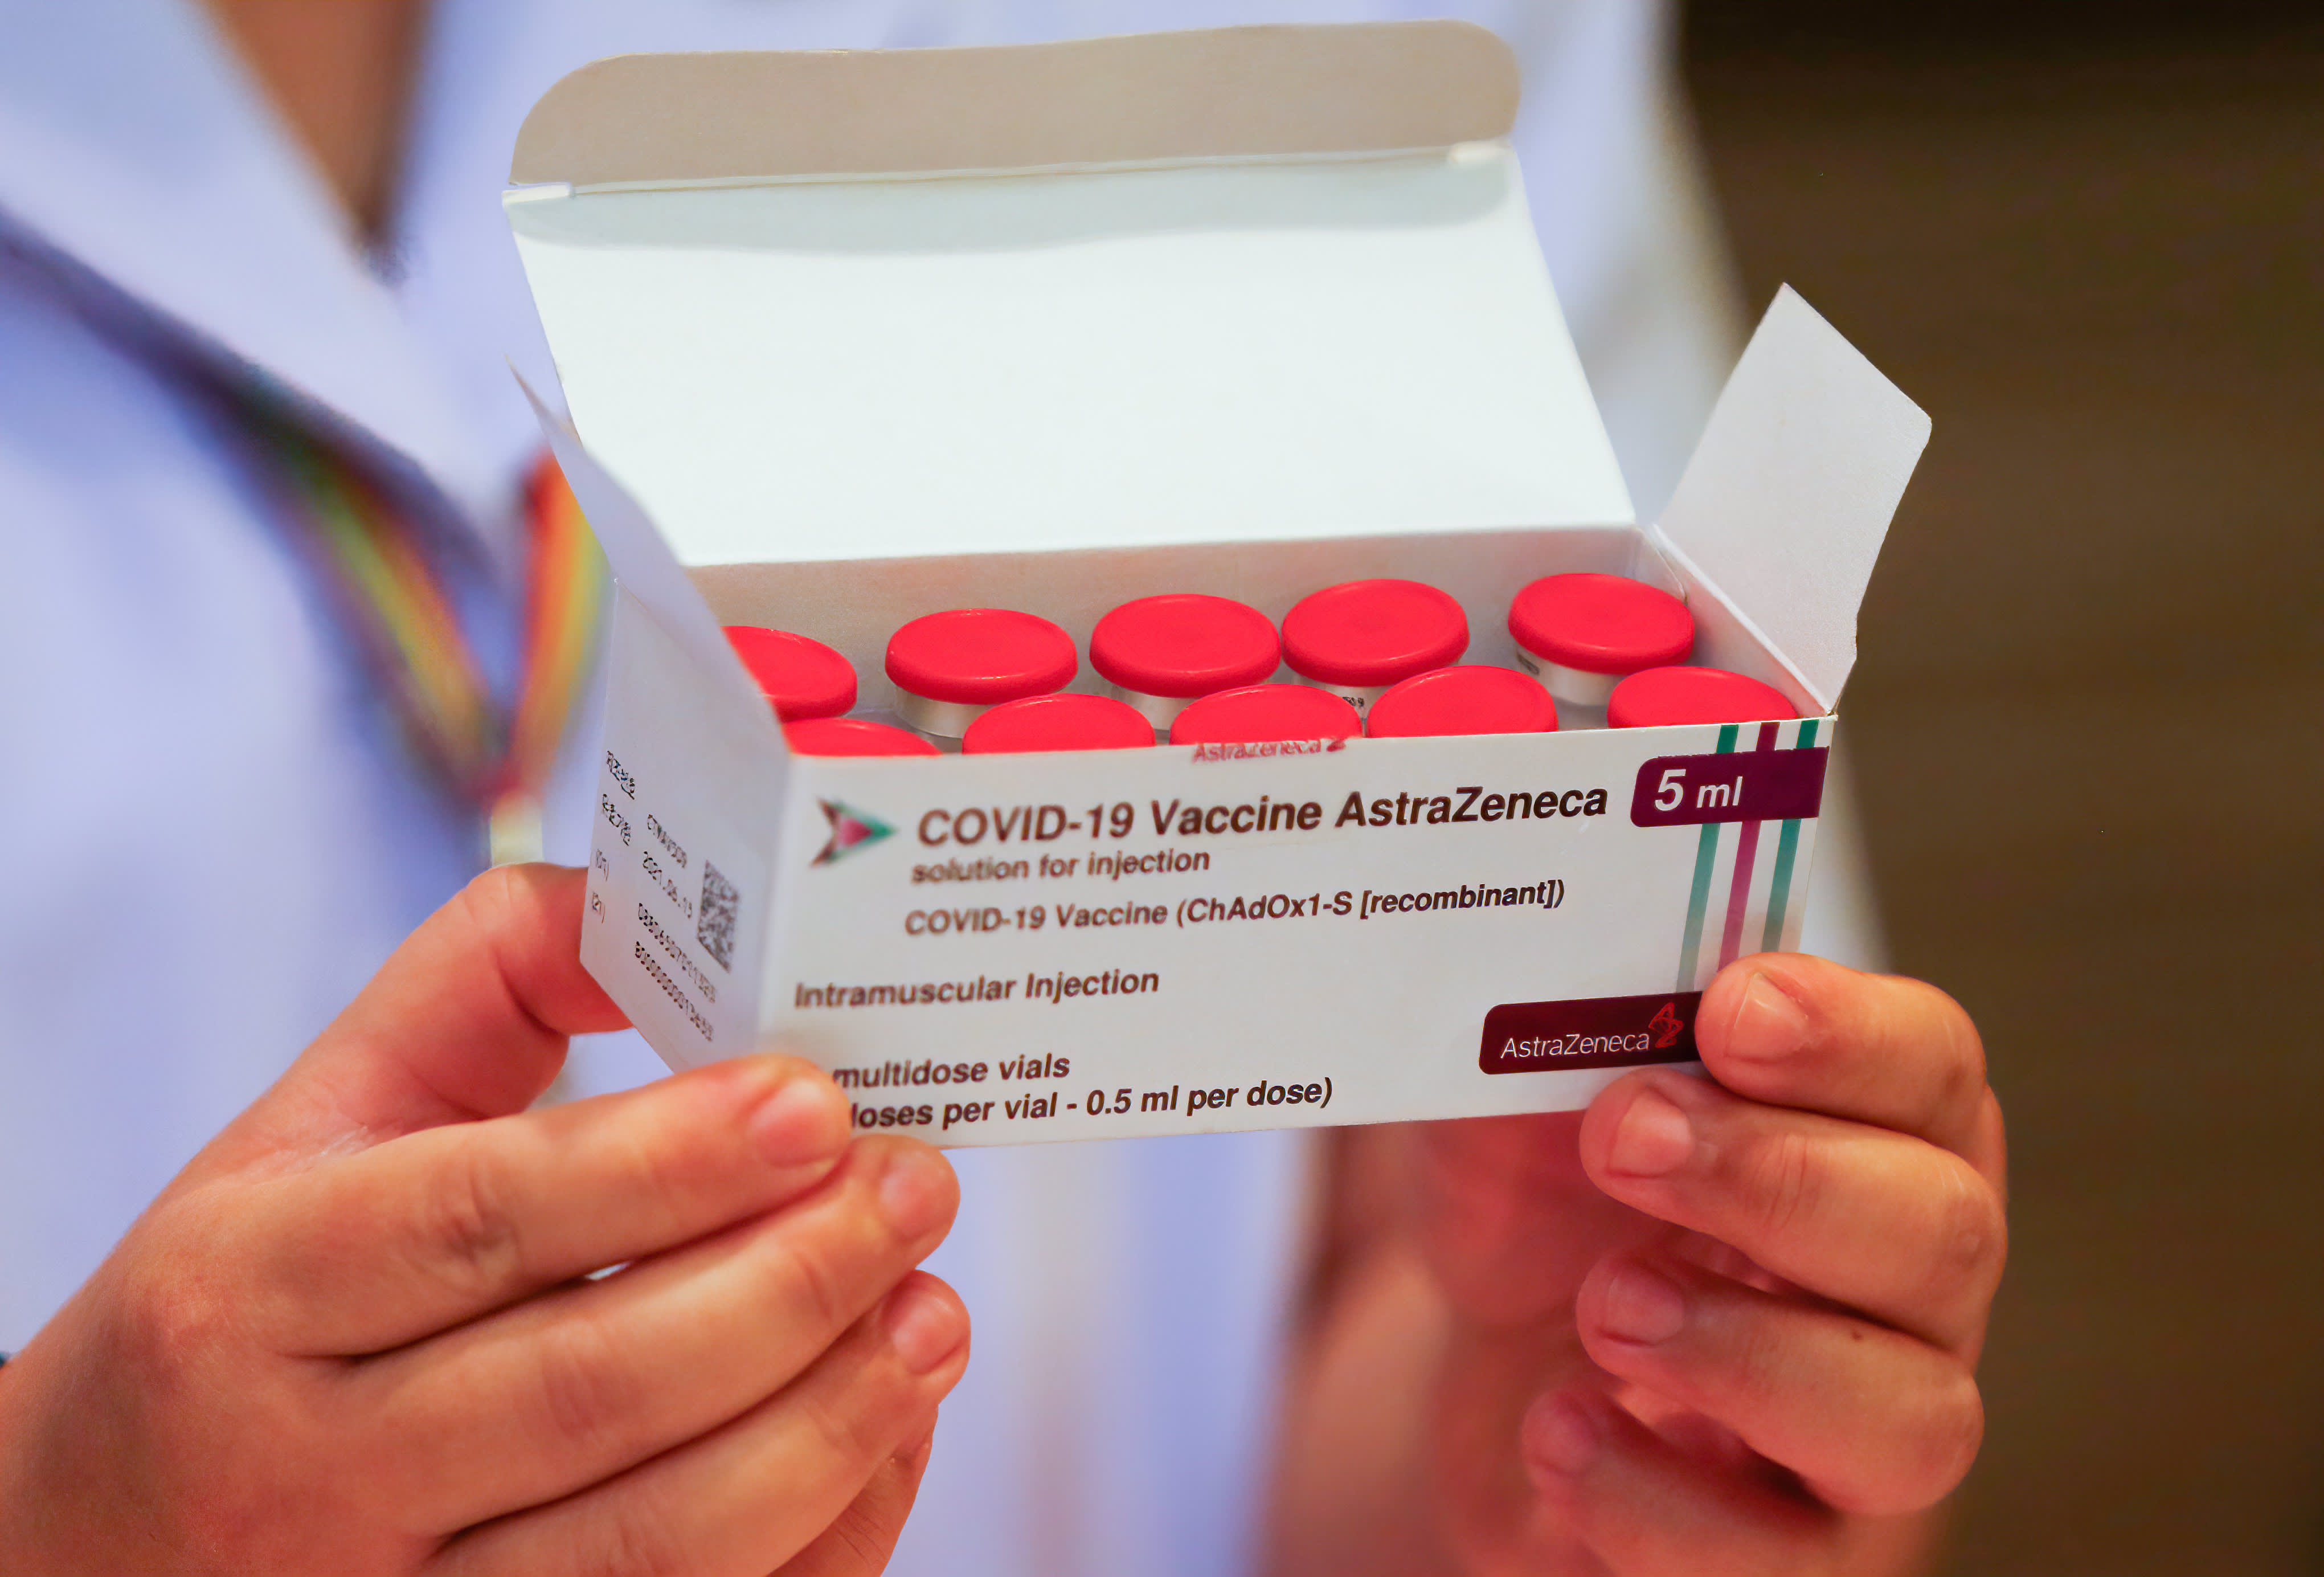 Solution injection for vaccine covid-19 astrazeneca Information for